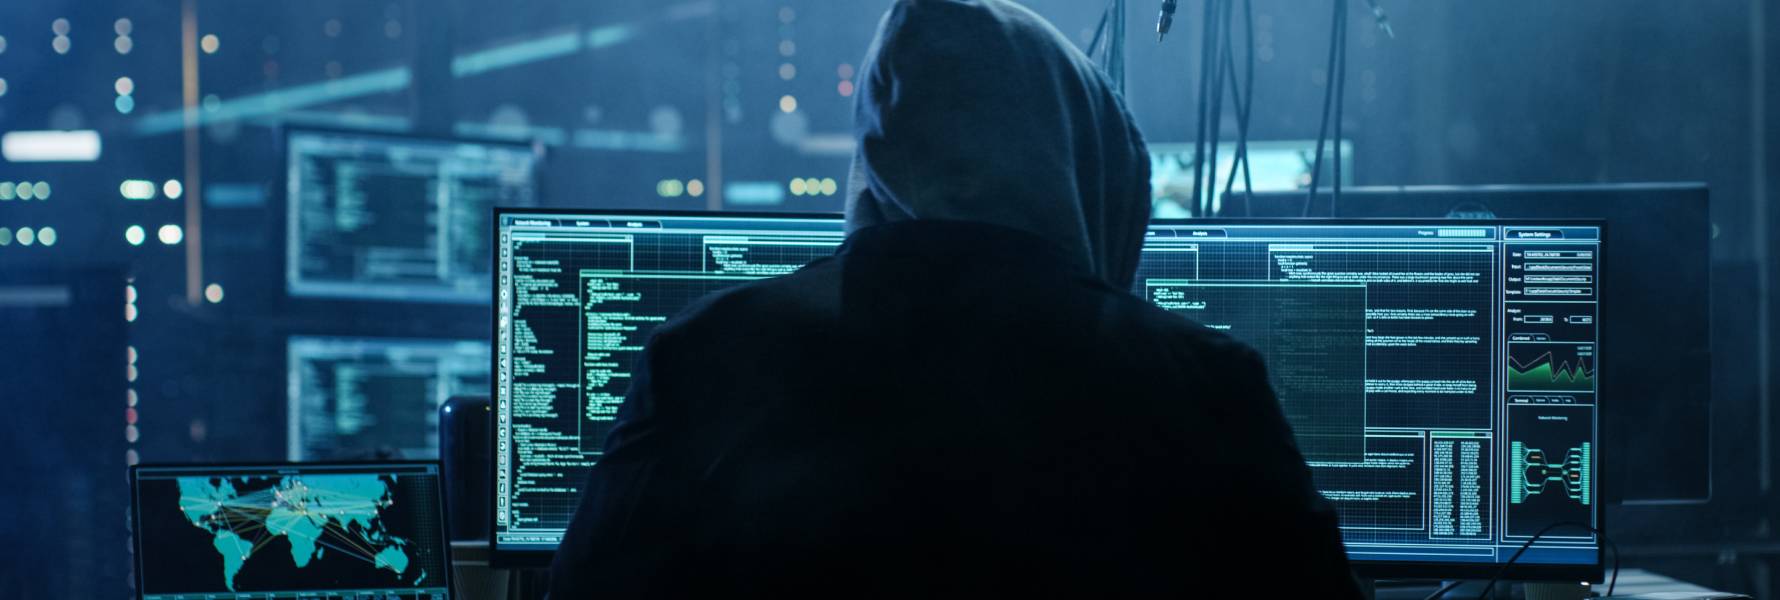 The 10 most famous hacking groups | White Blue Ocean